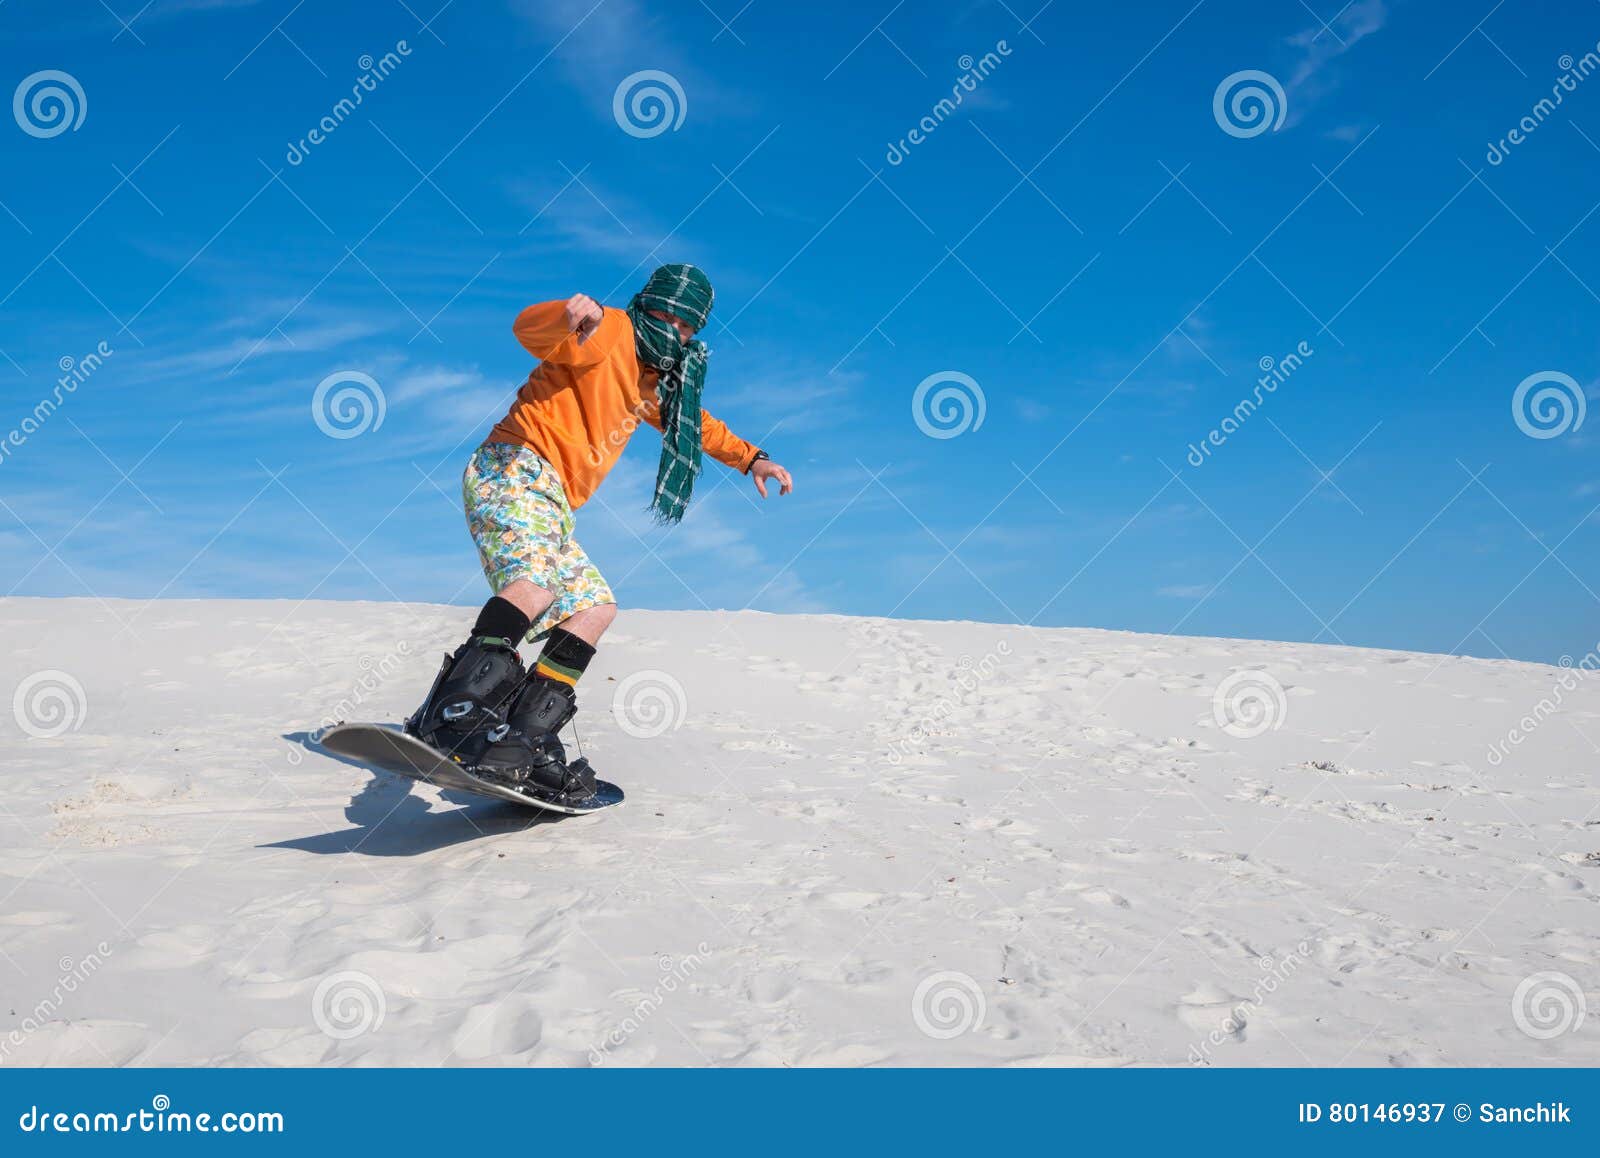 Snowboarder is Making a Trick on a Sand Dune. Wide Angle Stock Image ...